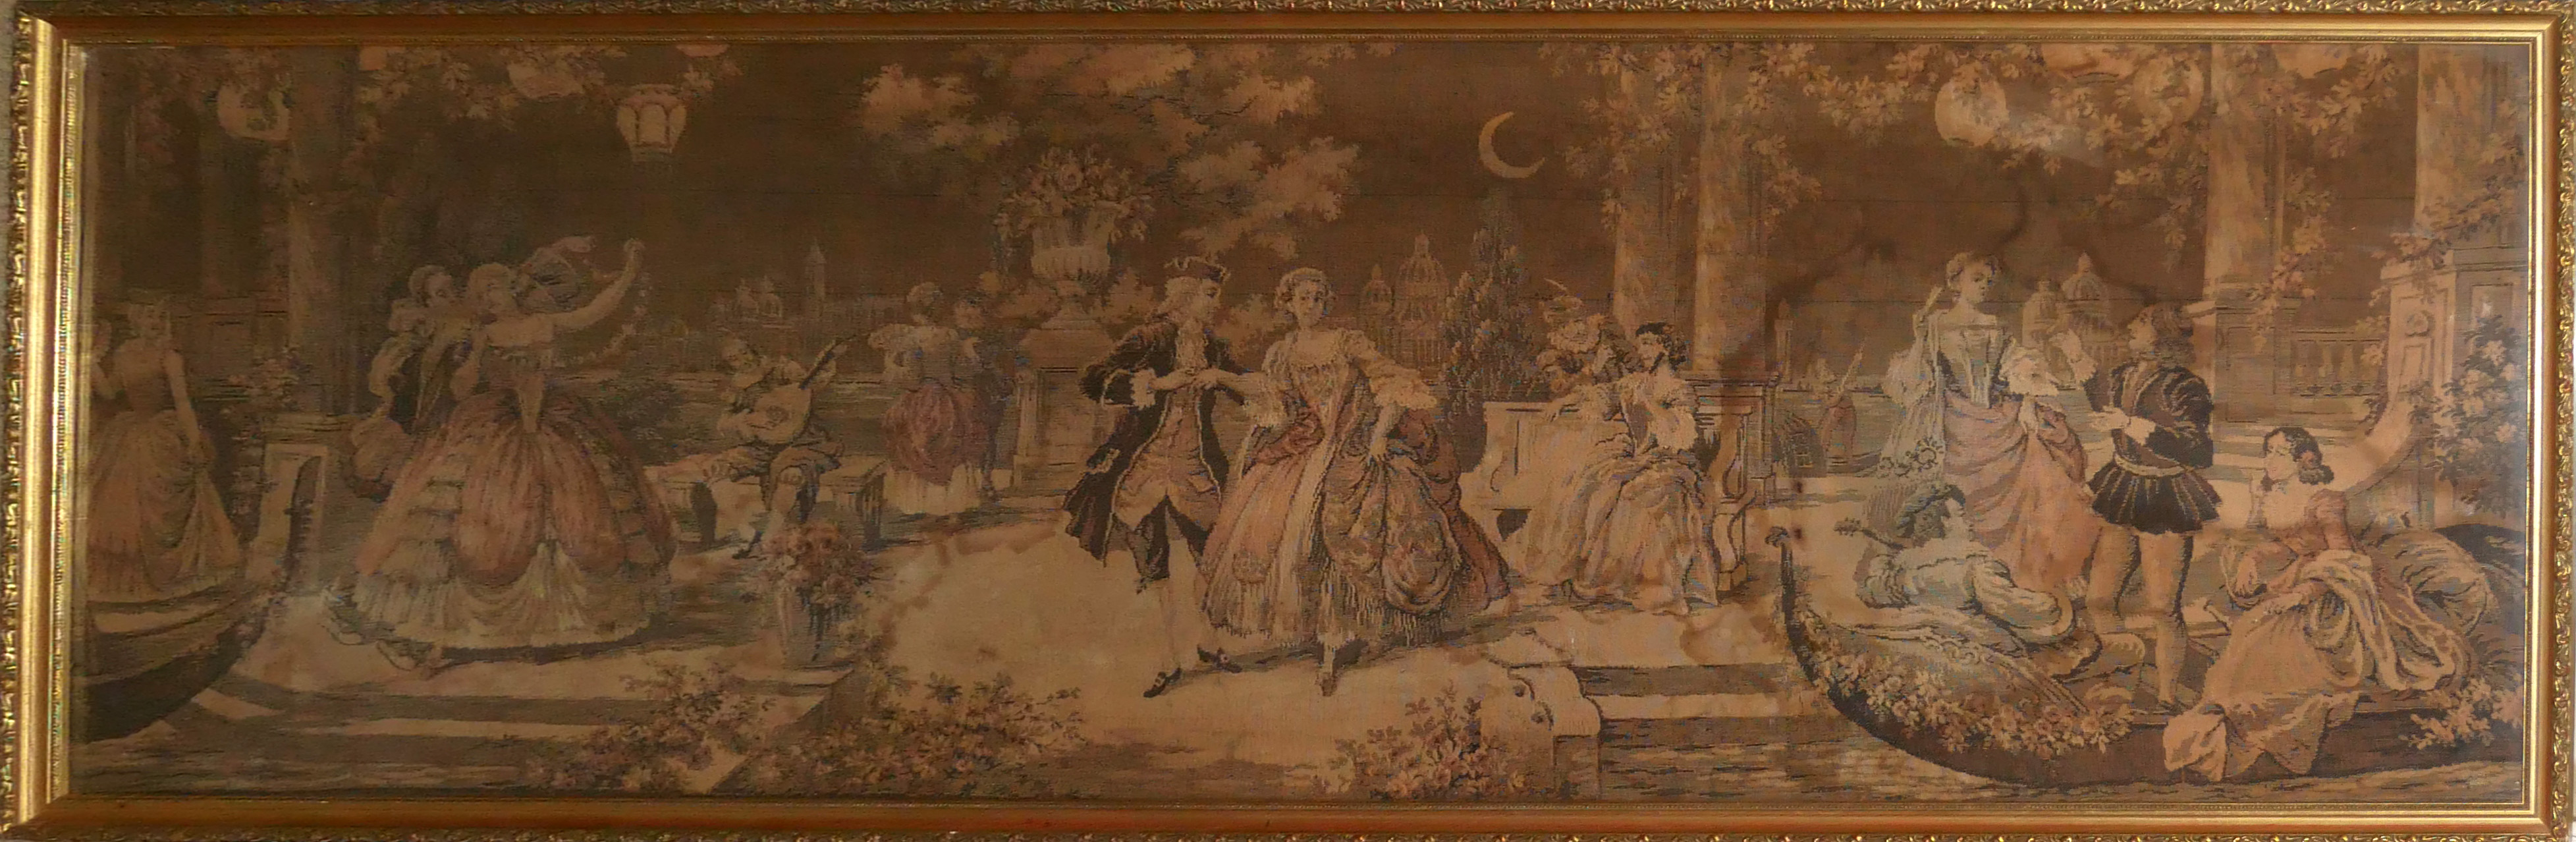 A 20TH CENTURY CONTINENTAL WOOLLEN TAPESTRY Courtyard scene with figures wearing 18th Century attire